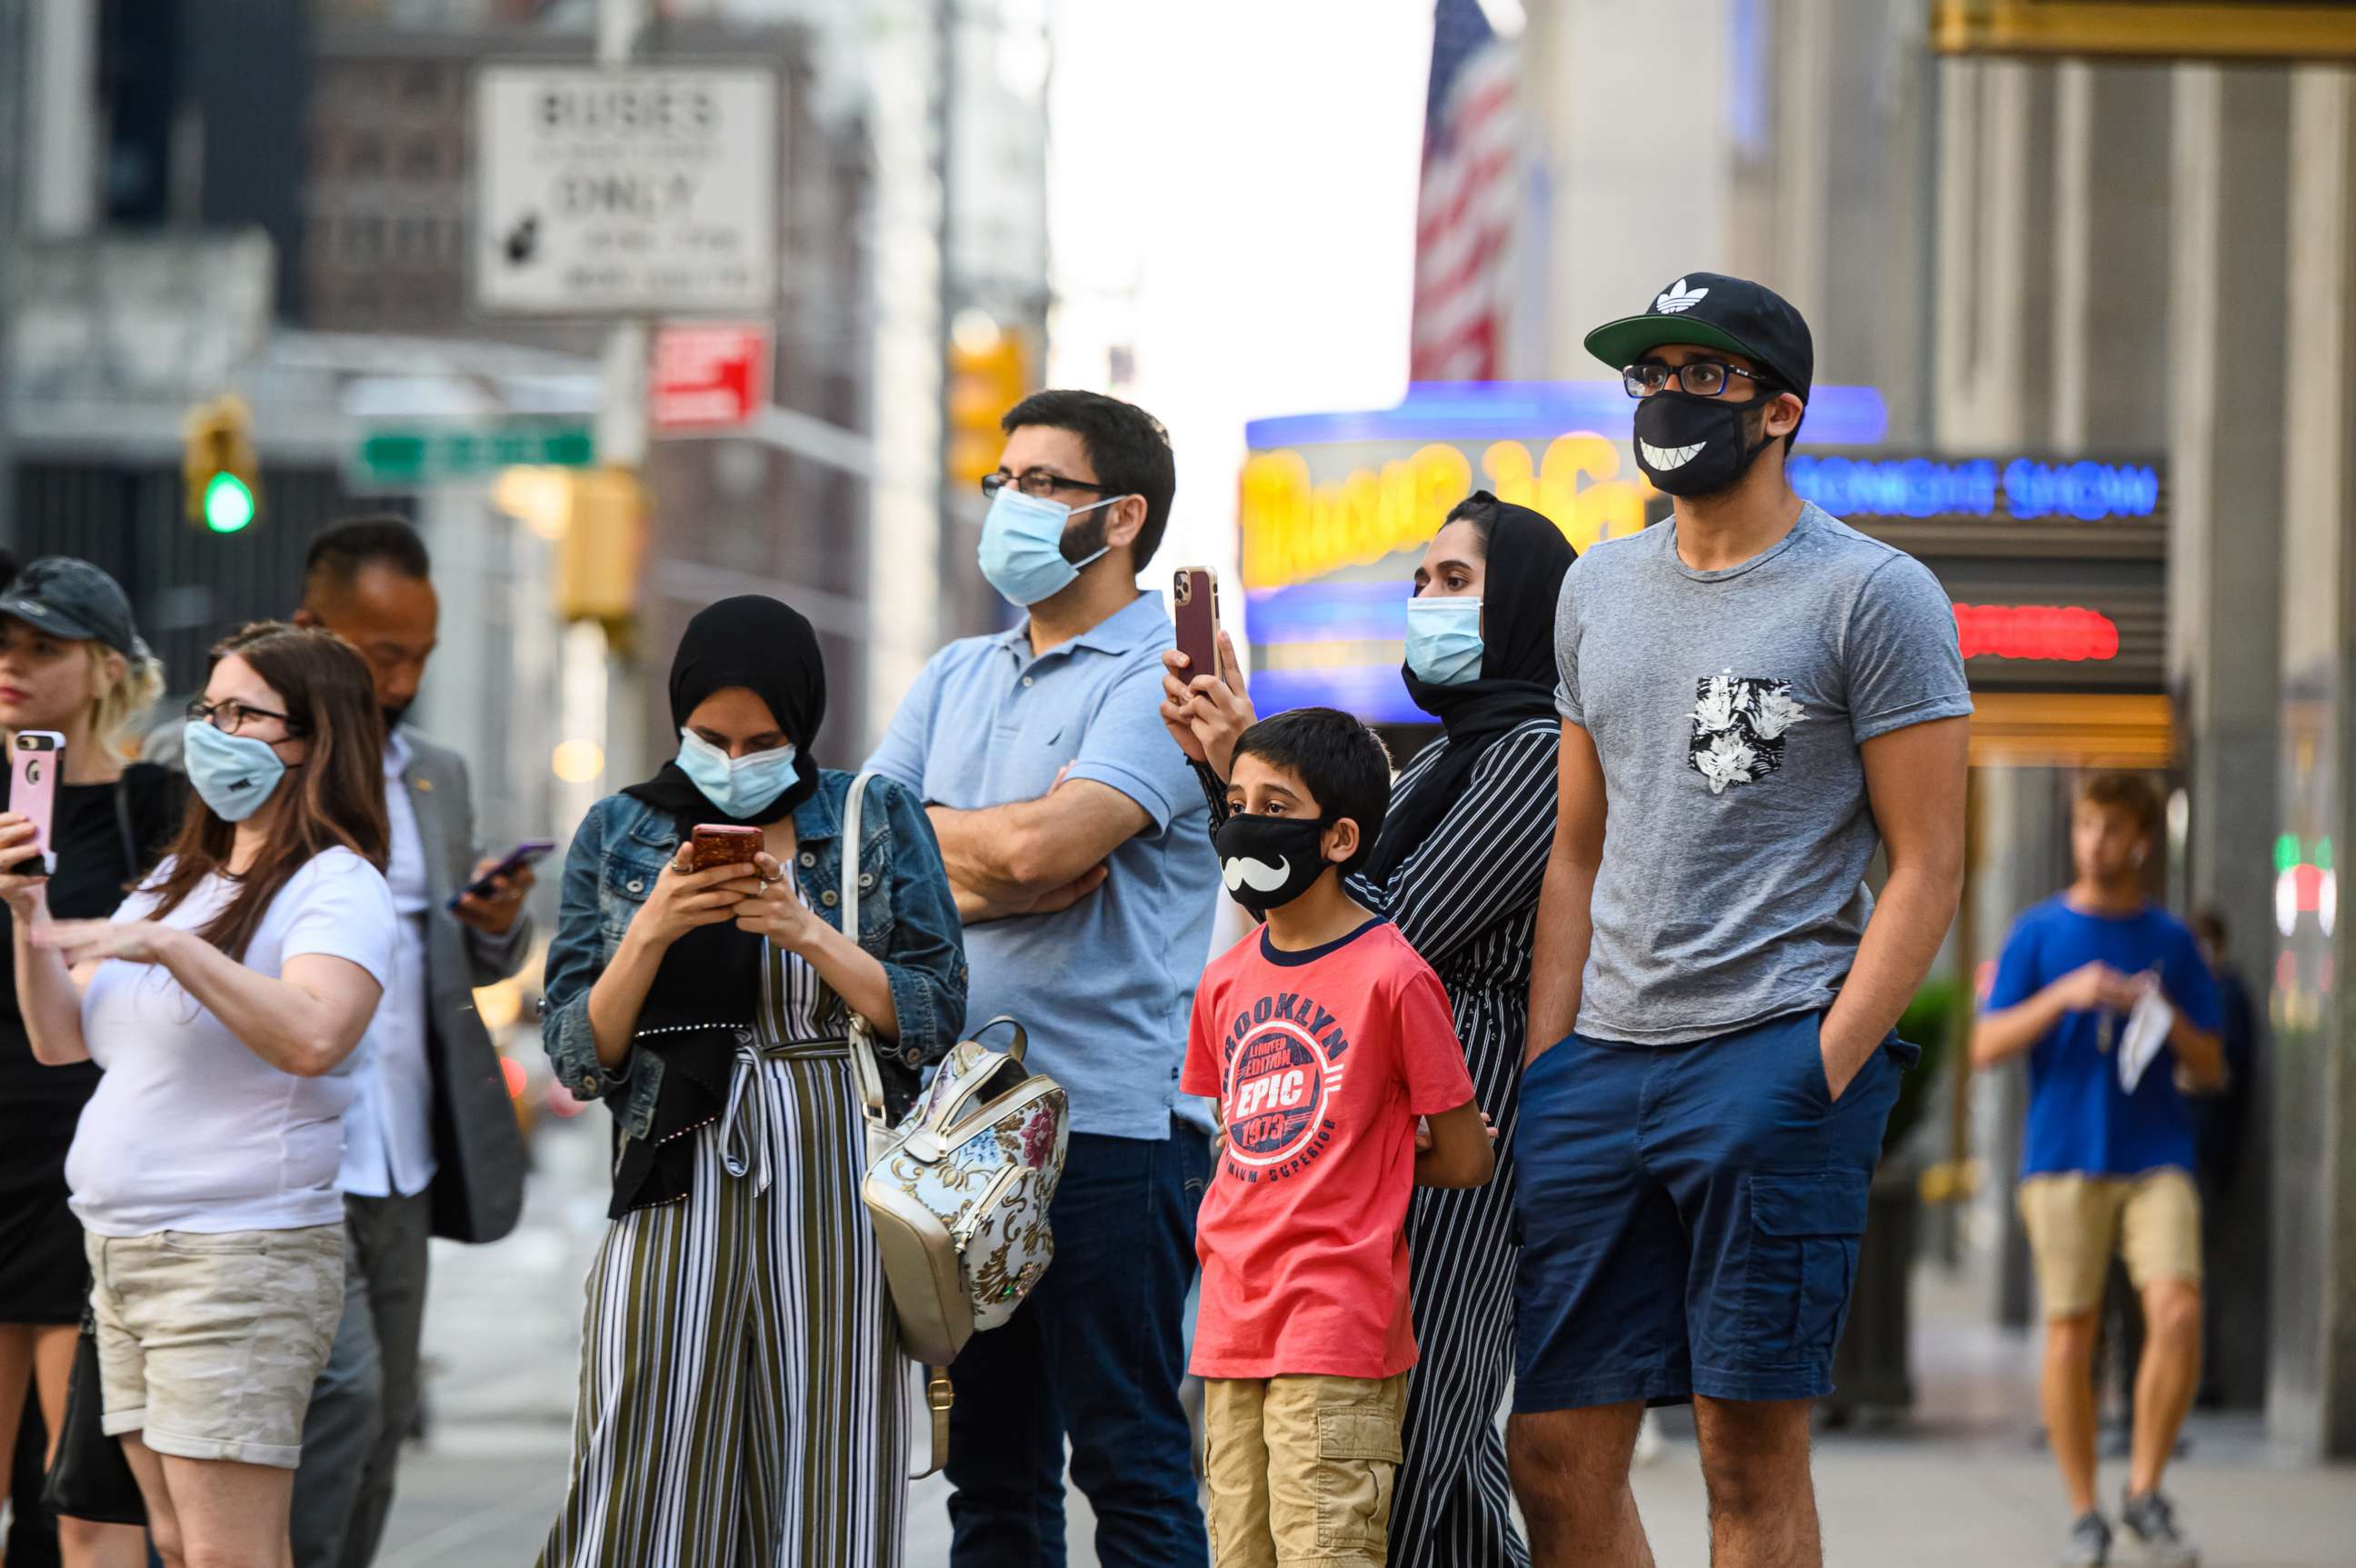 PHOTO: People wear protective face masks outside Radio City Music Hall as New York City moves into Phase 3 of re-opening following restrictions imposed to curb the coronavirus pandemic on July 12, 2020.